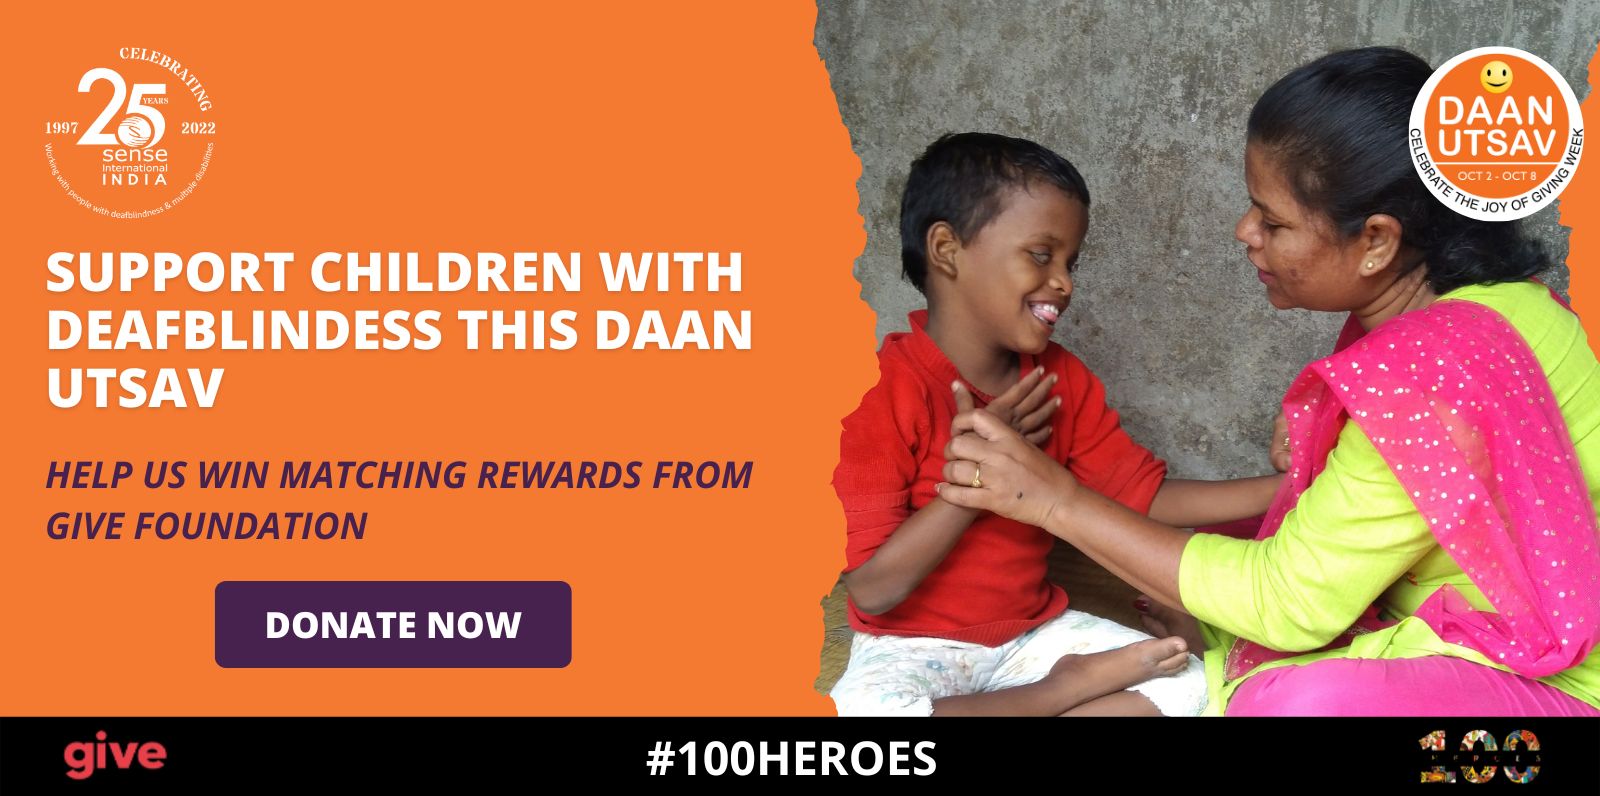 Support Children with Deafblindness this DaanUtsav and help us win matching rewards from Give Foundation